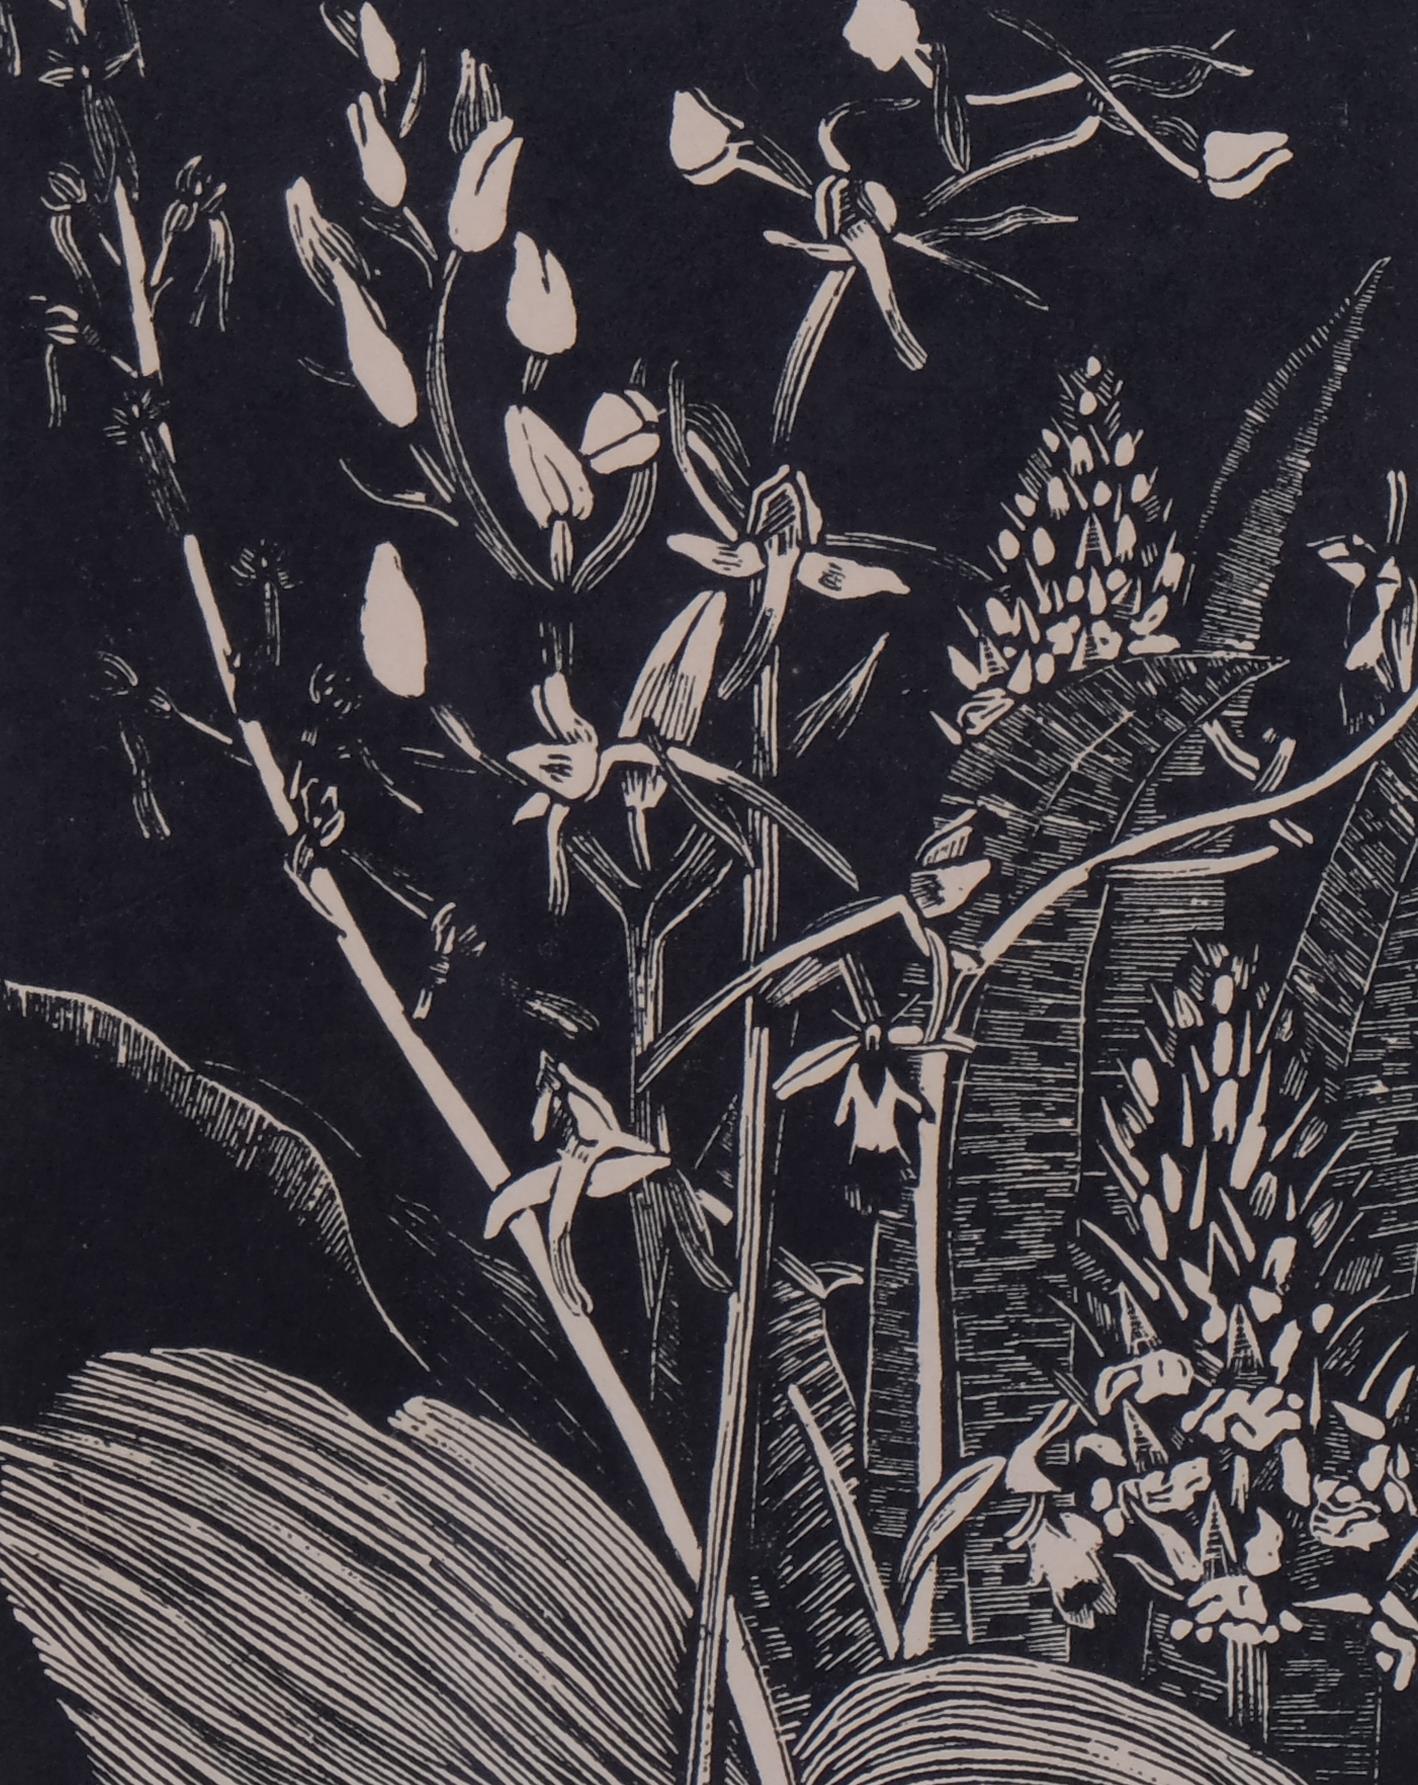 John Northcote Nash (1893-1977), wood engraving on paper, Orchids, 14cm x 10.7cm, mounted, glazed